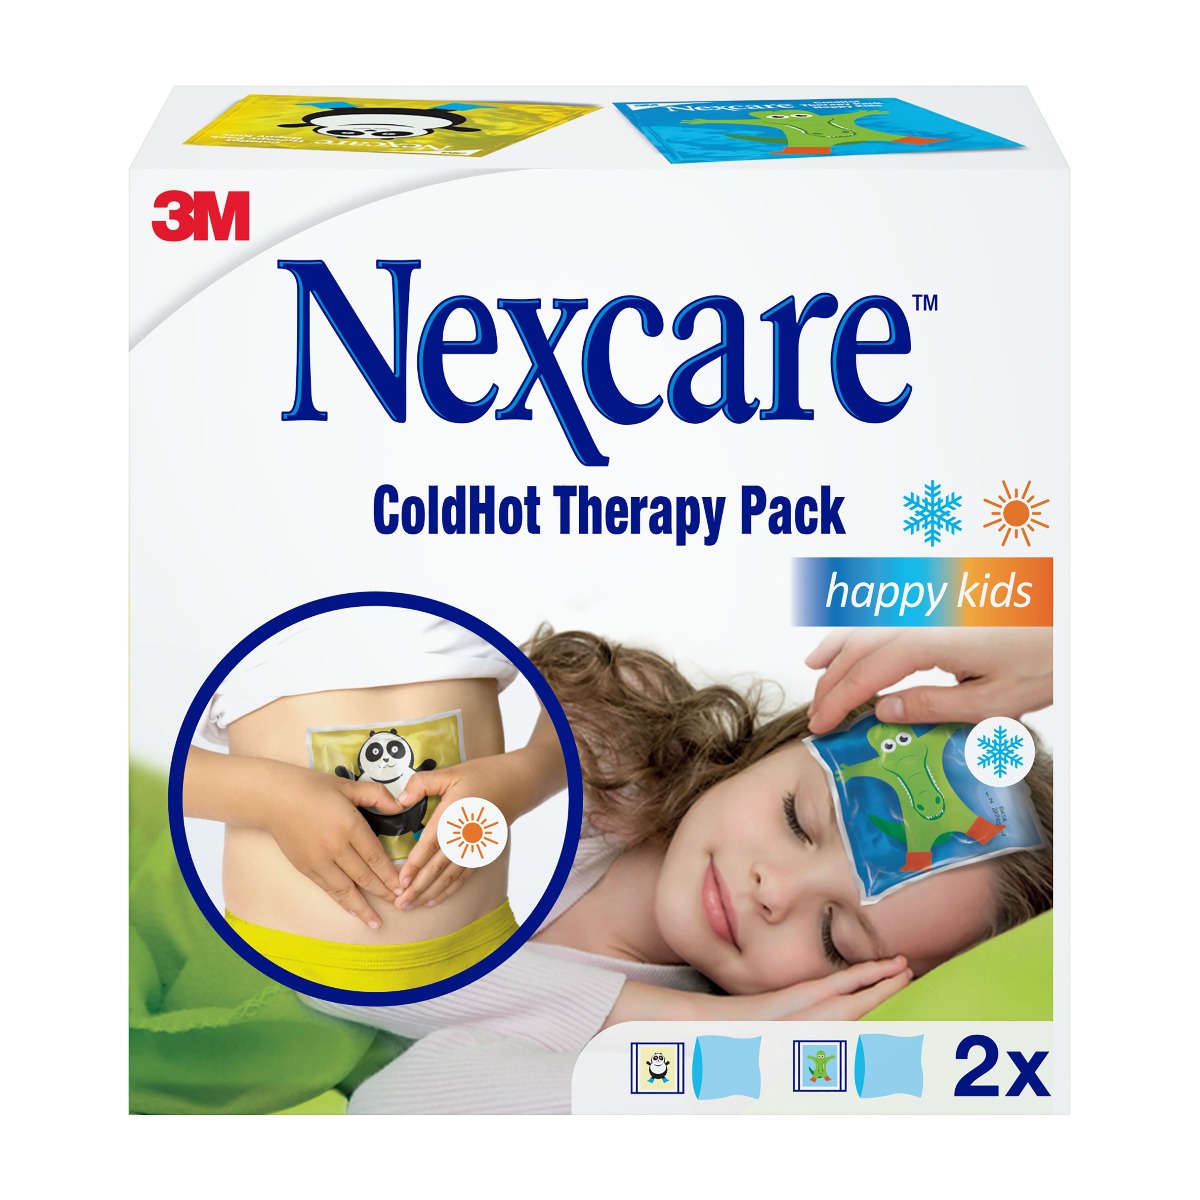 3M Nexcare ColdHot Therapy Pack Happy Kids 2 ks 3M